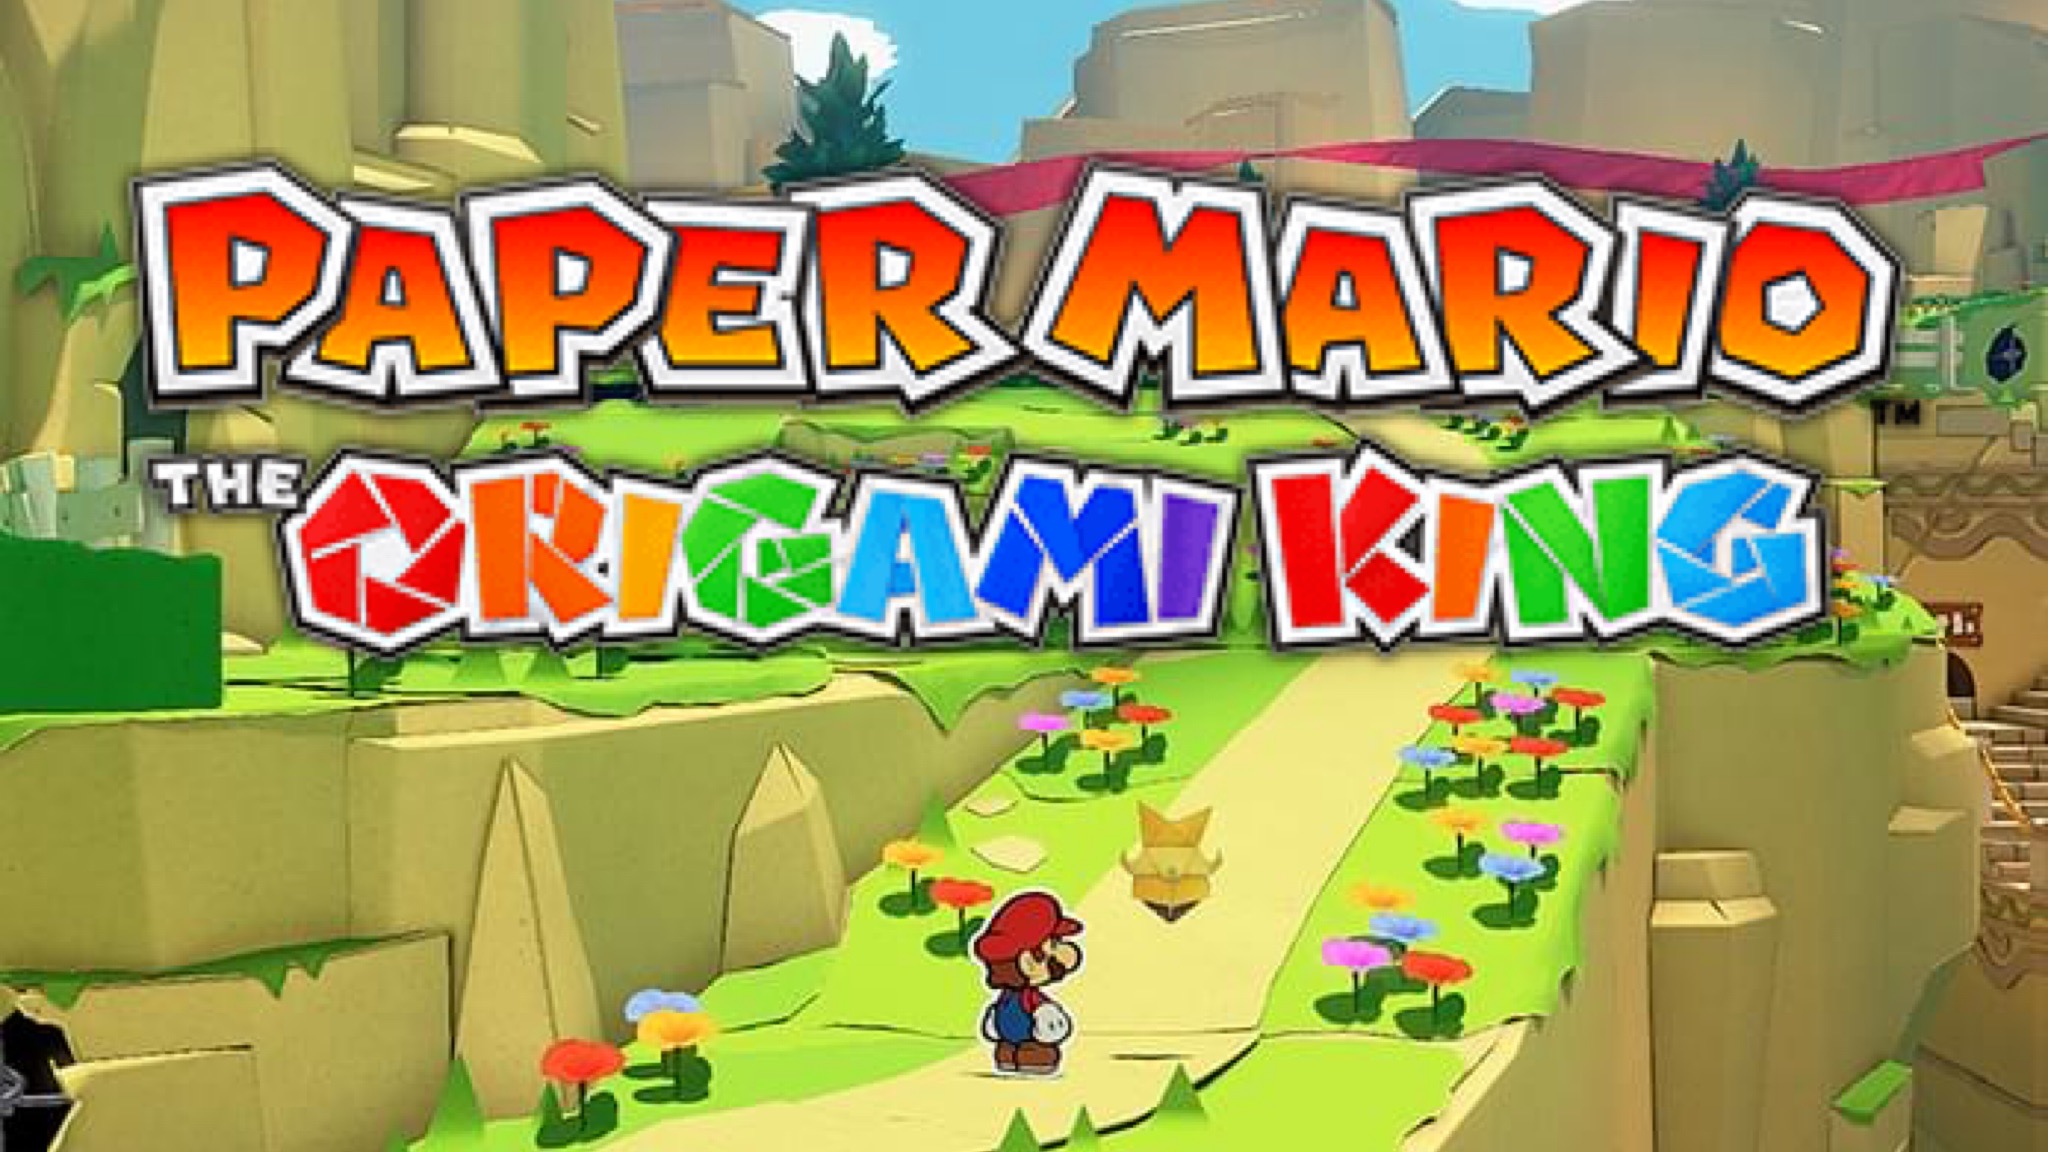 Paper Mario The Origami King Arriving on Nintendo Switch on July 17